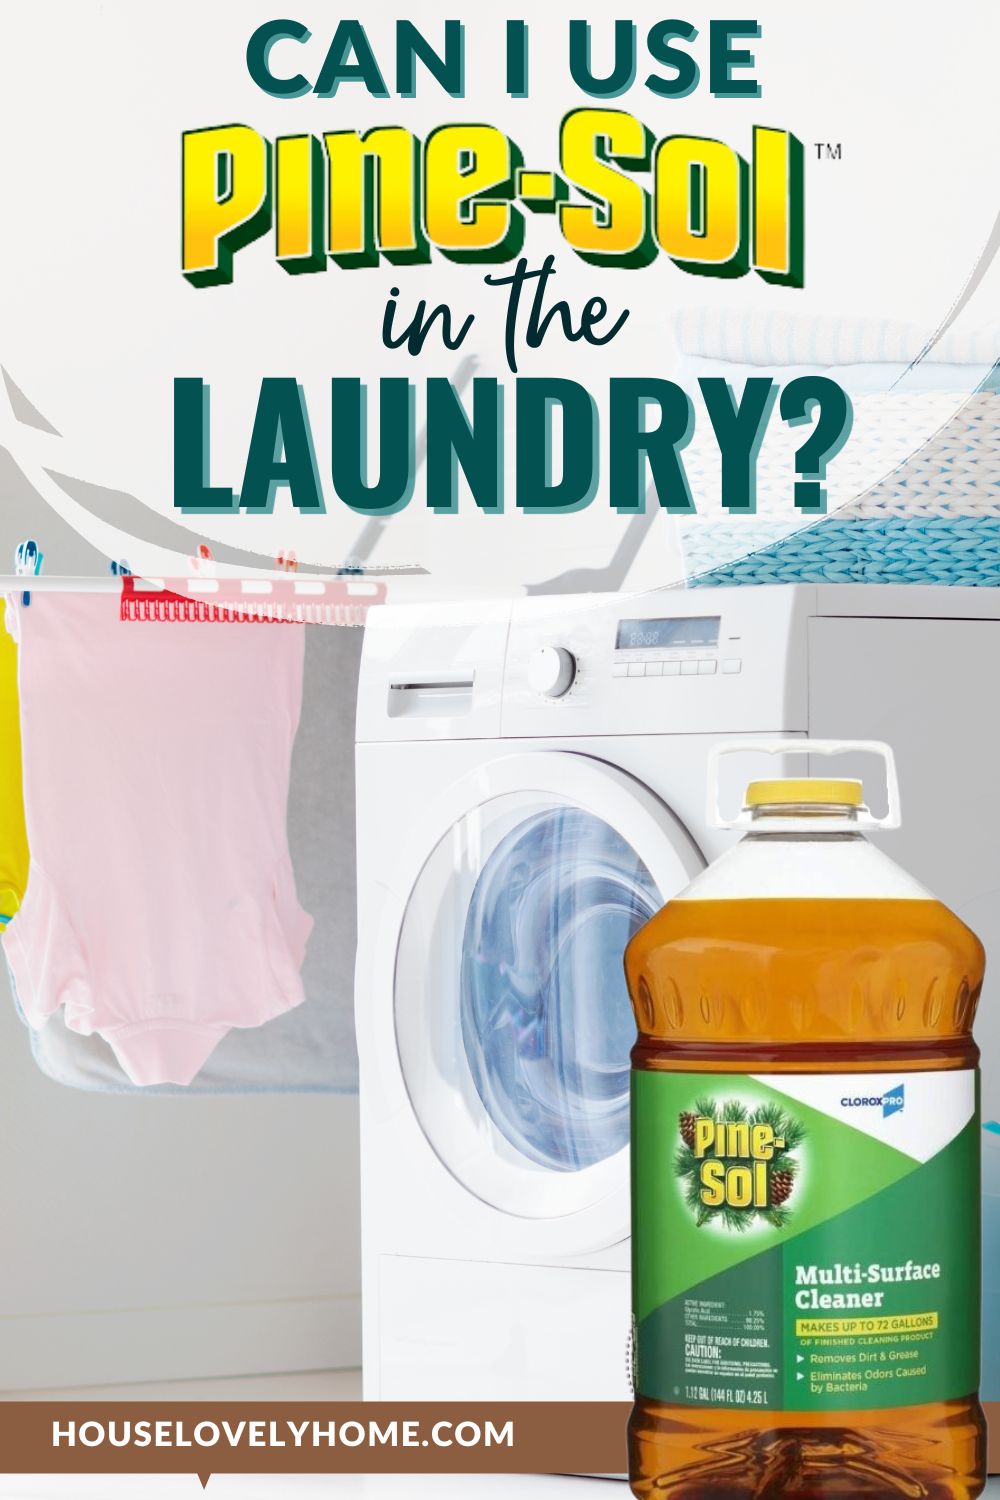 An image showing a washing machine, some clothes hanging, a bottle of Pine-Sol and a text overlays that read Can You Use Pine Sol in the Laundry